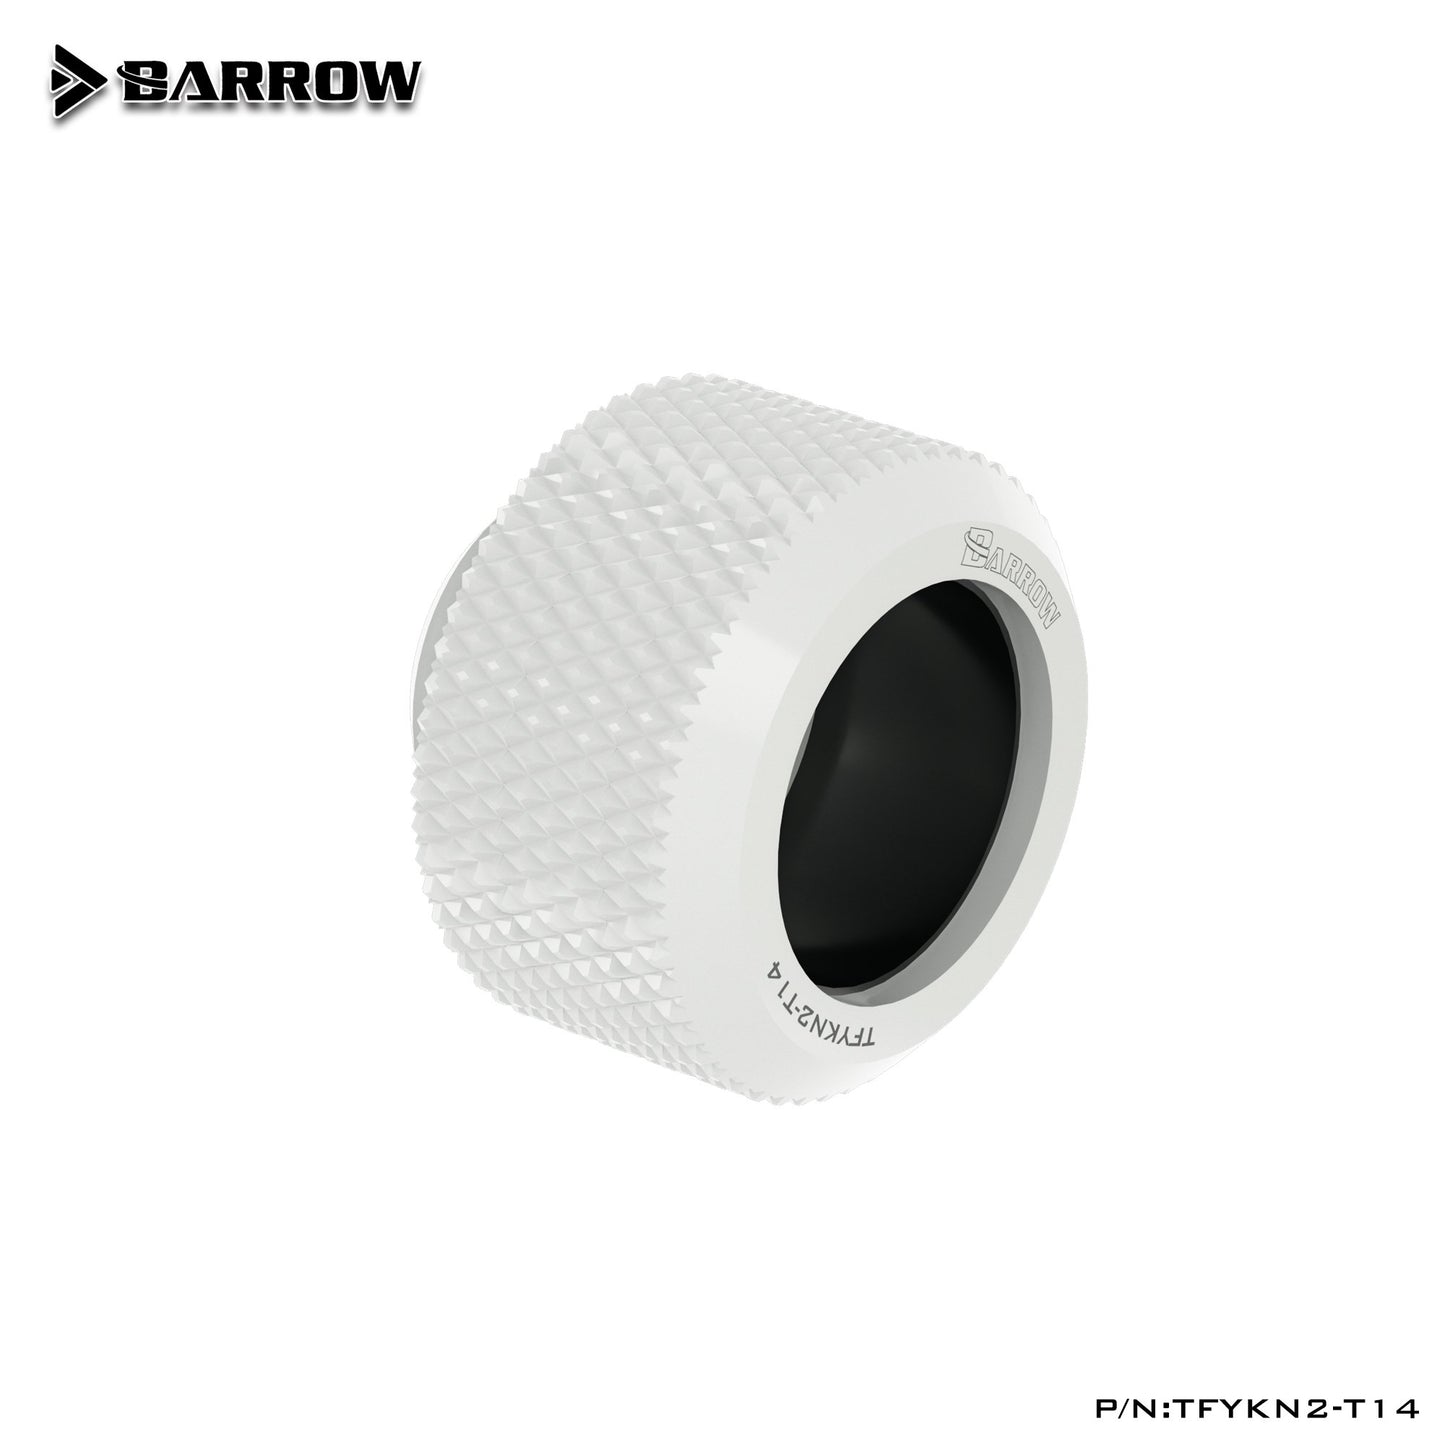 Barrow TFYKN2-T14, OD14mm Hard Tube Fittings, Choice series Enhanced Anti-off Rubber Ring, For OD14mm Hard Tubes